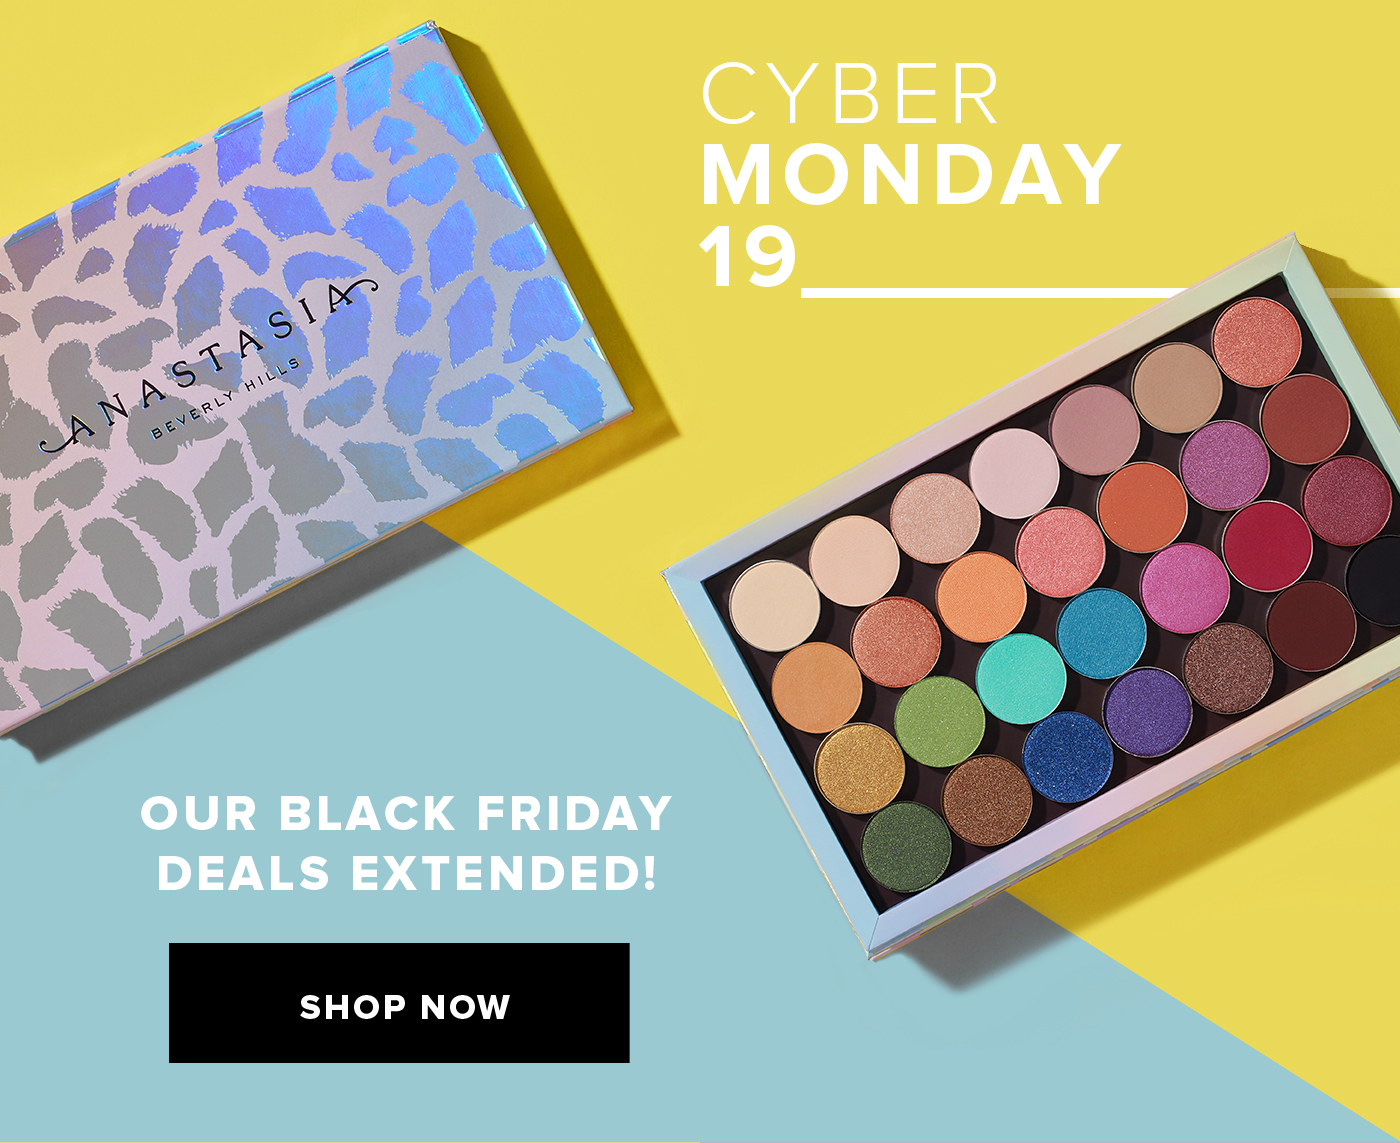 CYBER MONDAY 19 OUR BLACK FRIDAY DEALS EXTENDED! SHOP NOW